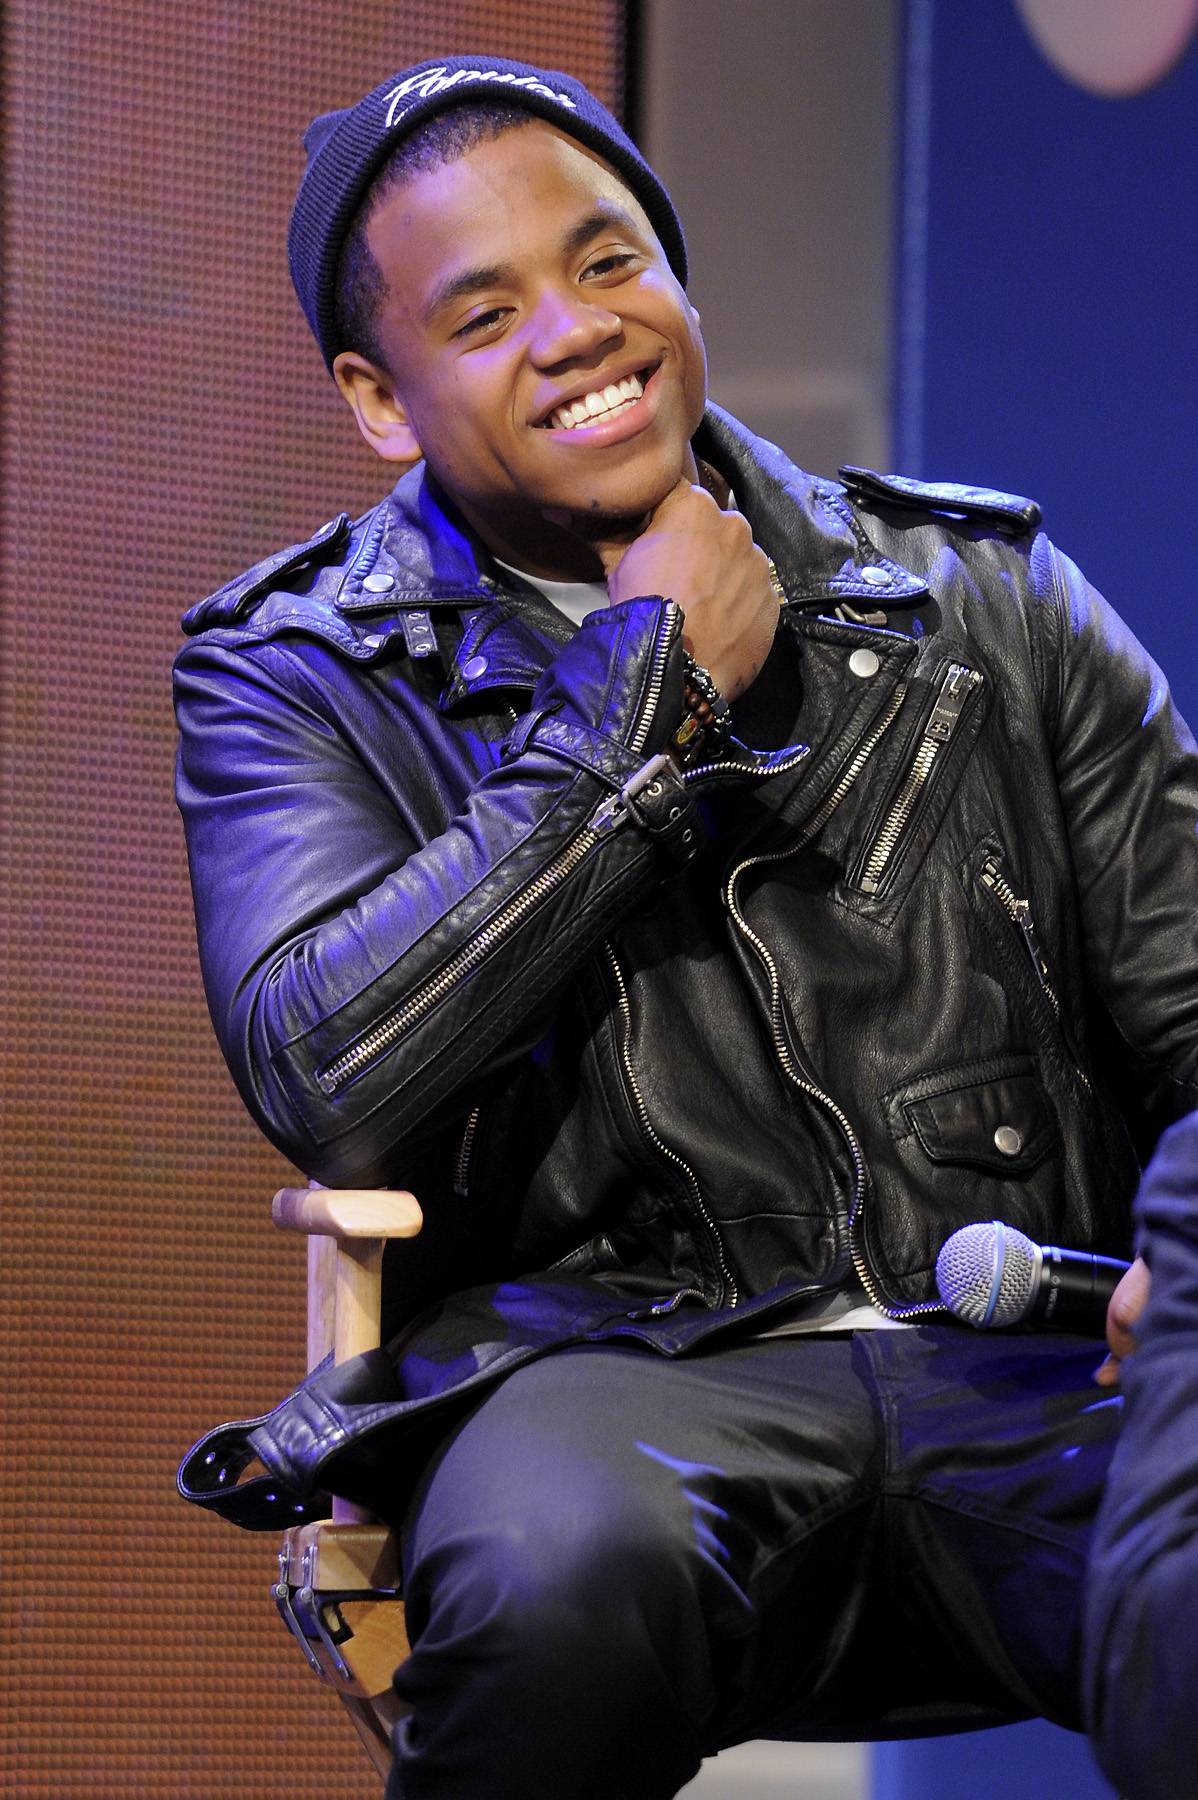 Mack Wilds - July 31, 2013 –&nbsp; His name is Mack. You may know this drama king as Tristan Wilds or Dixon Wilson on CW's 90210, but tonight you'll refer to him as Mack Wilds — a pop/R&amp;B singer who will not be acting, but ready to &quot;Own It&quot; on 106.   Don't miss the New Joint from Mister Mack. Tonight at 6P/5C!(Photo: John Ricard / BET)&nbsp;